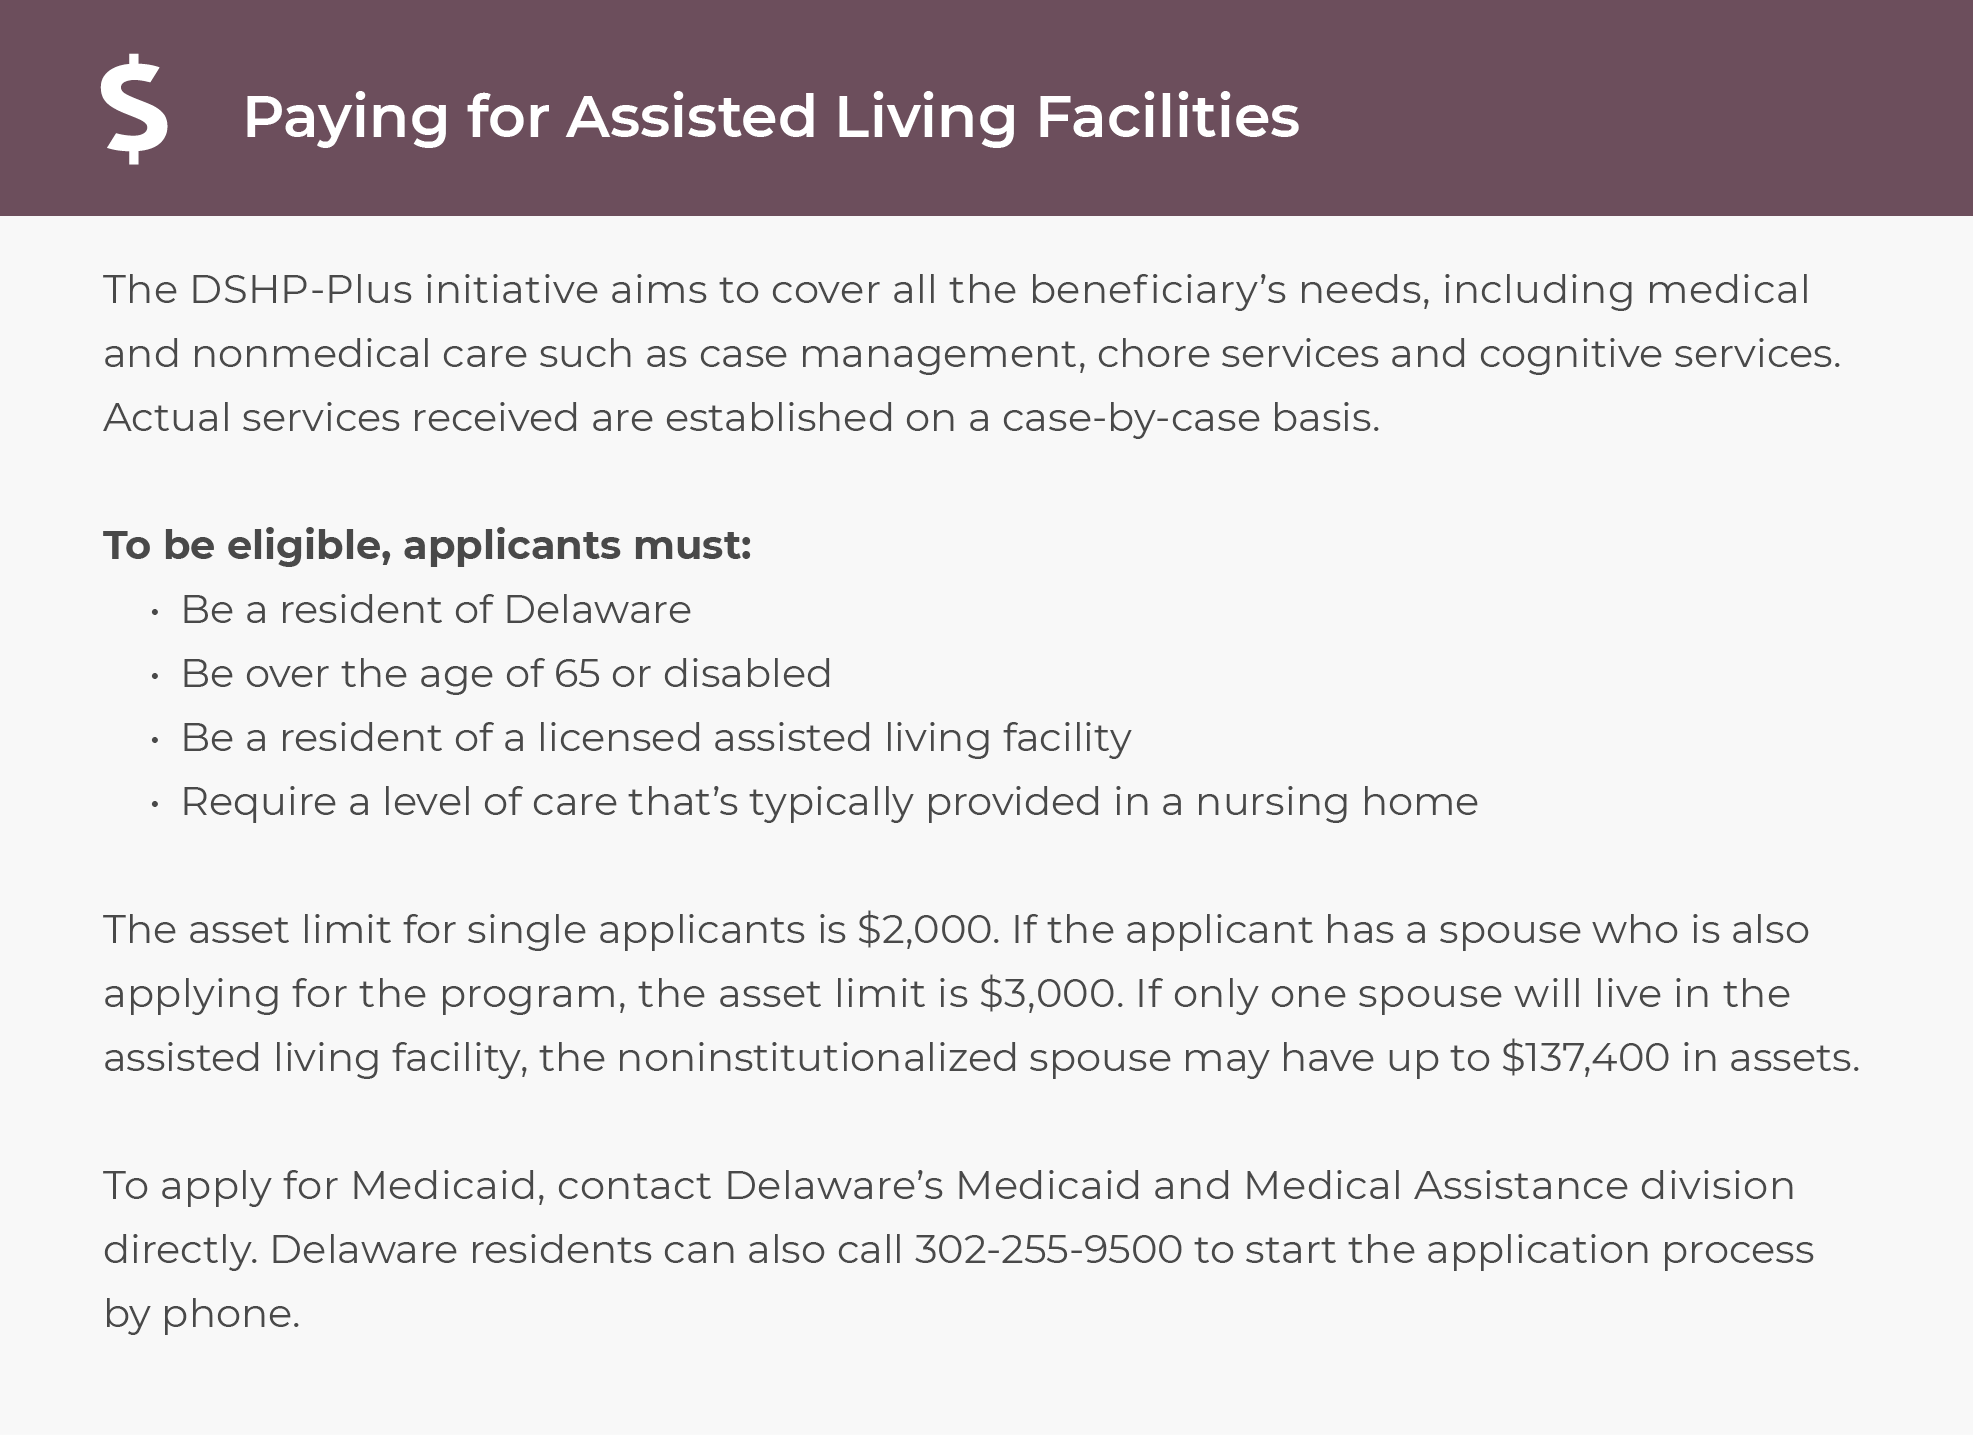 Paying for for Assisted Living in Delaware